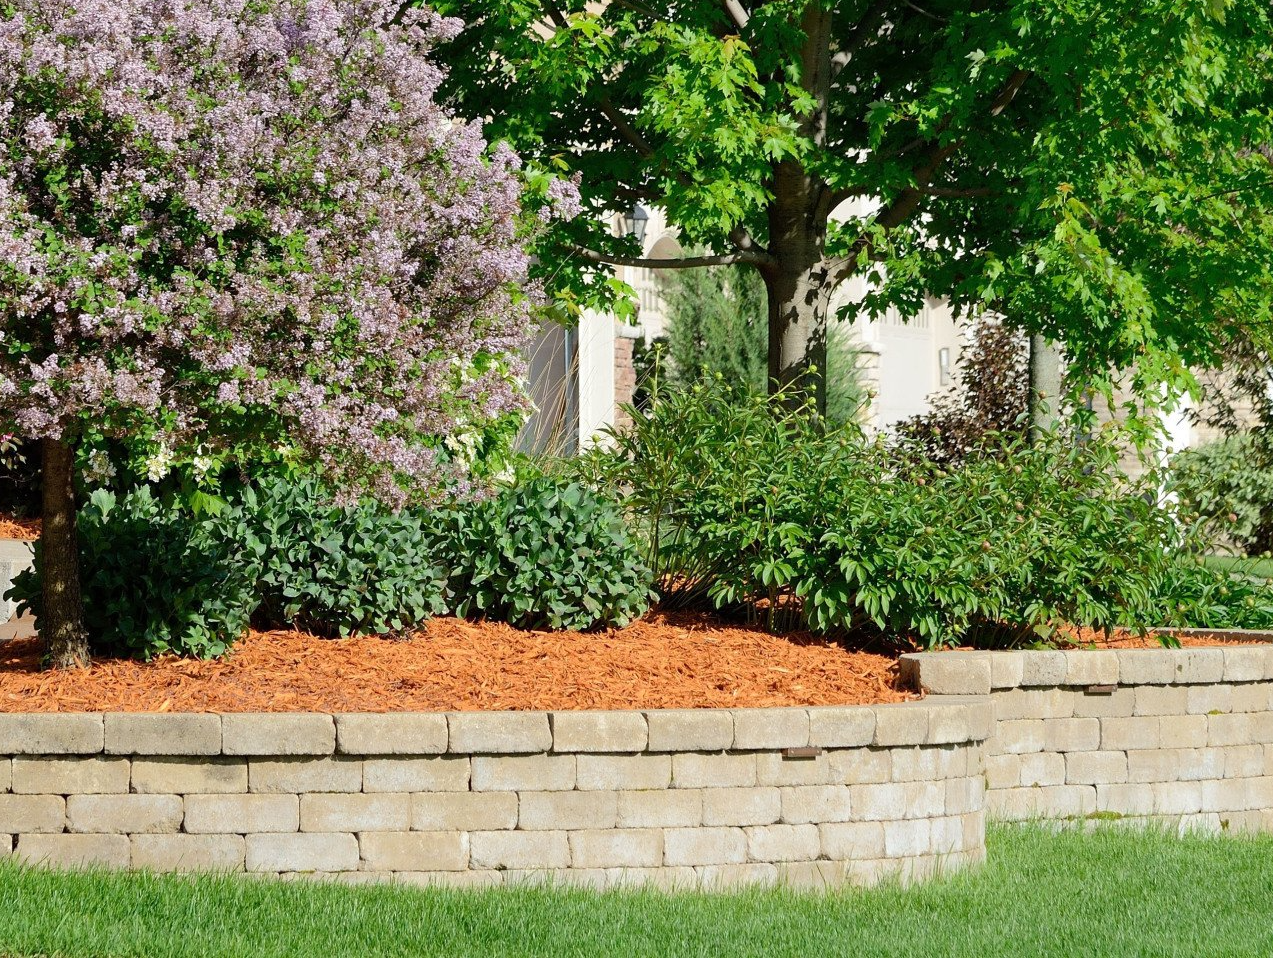 Stone and Retaining Wall Services